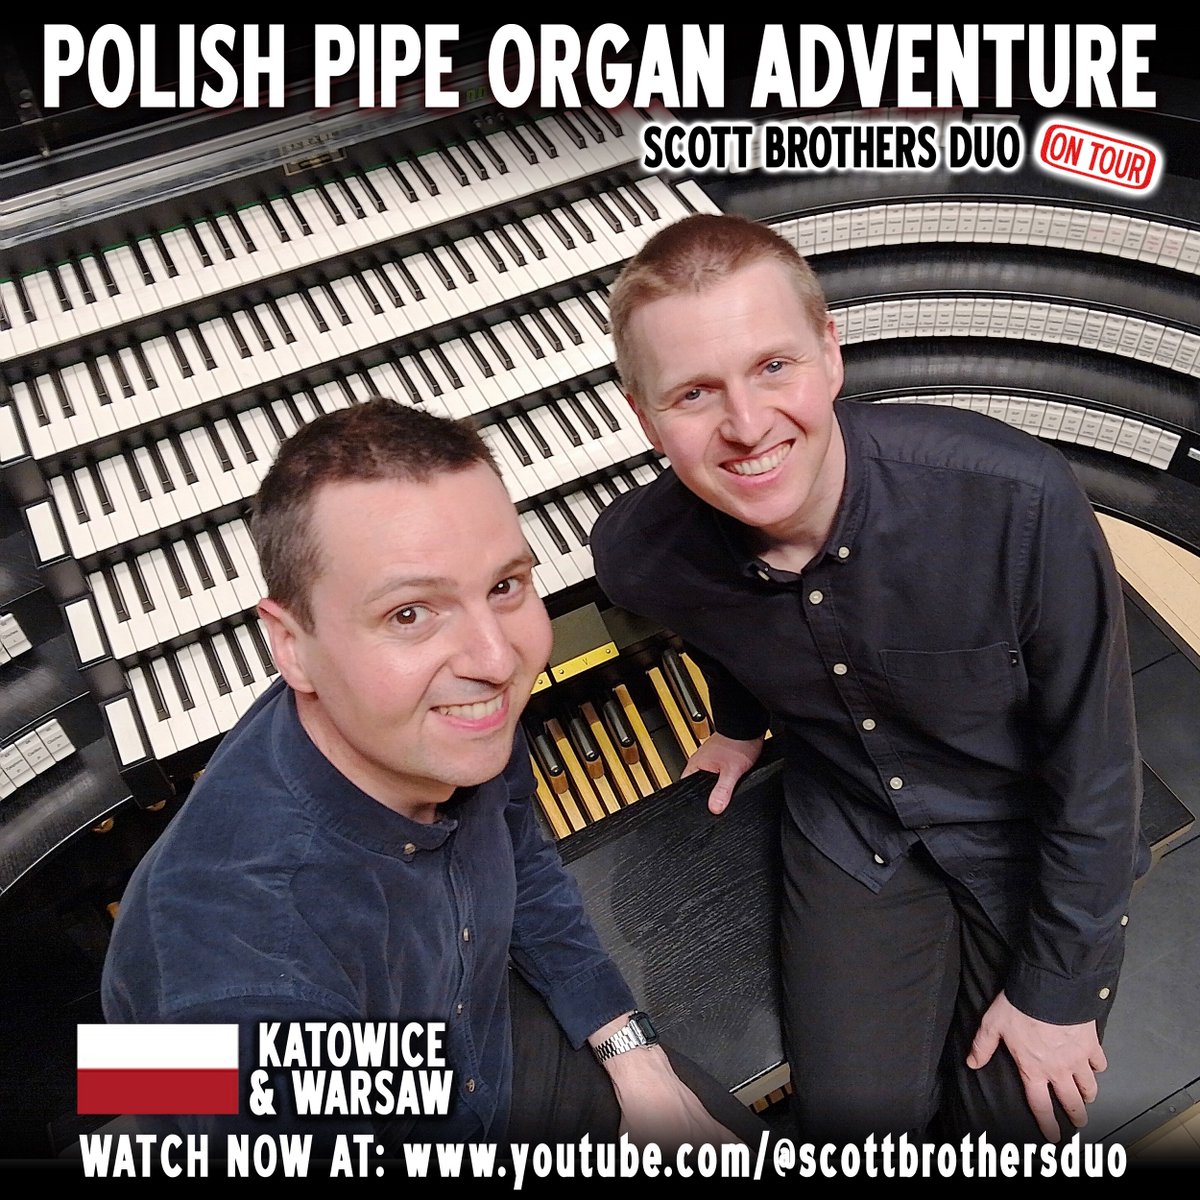 Watch our latest Vlog 'Polish Pipe Organ Adventure'! We travel to Katowice, Poland to the new Skrabl organ at @NOSPR_official - We then travel to Warsaw to the newly rebuilt Zych pipe organ of All Saints Church! Watch here: youtu.be/71UDo5l8QKU